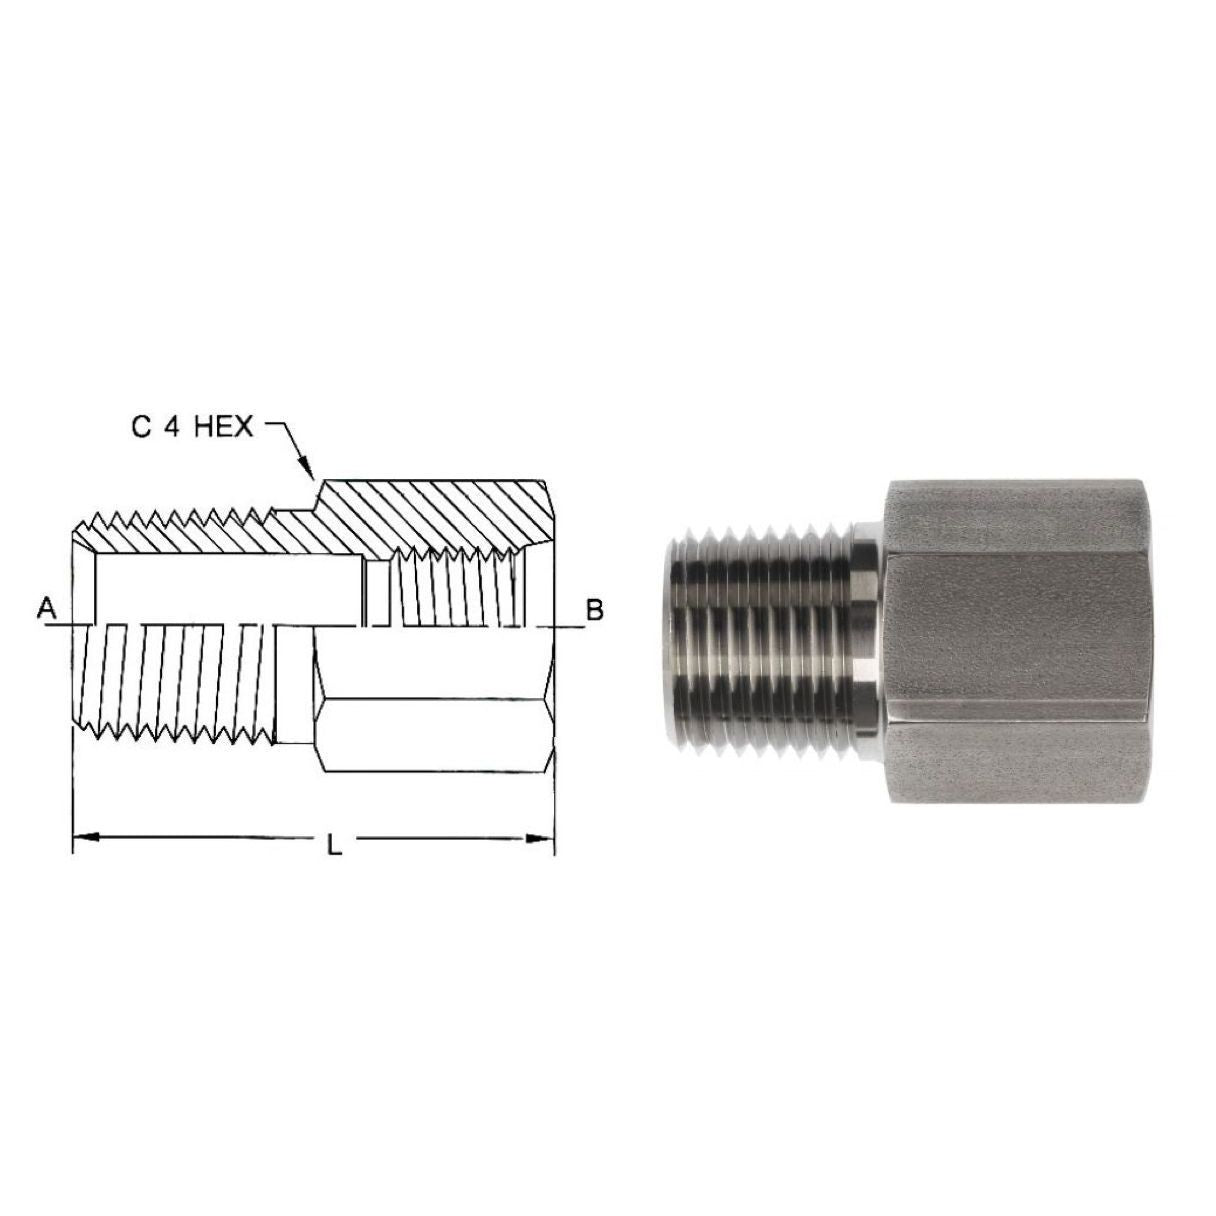 6404-04-04 : OneHydraulics Adapter, Straight, 0.25 (1/4") Female ORB x 0.25 (1/4") Male, Steel, 6000psi